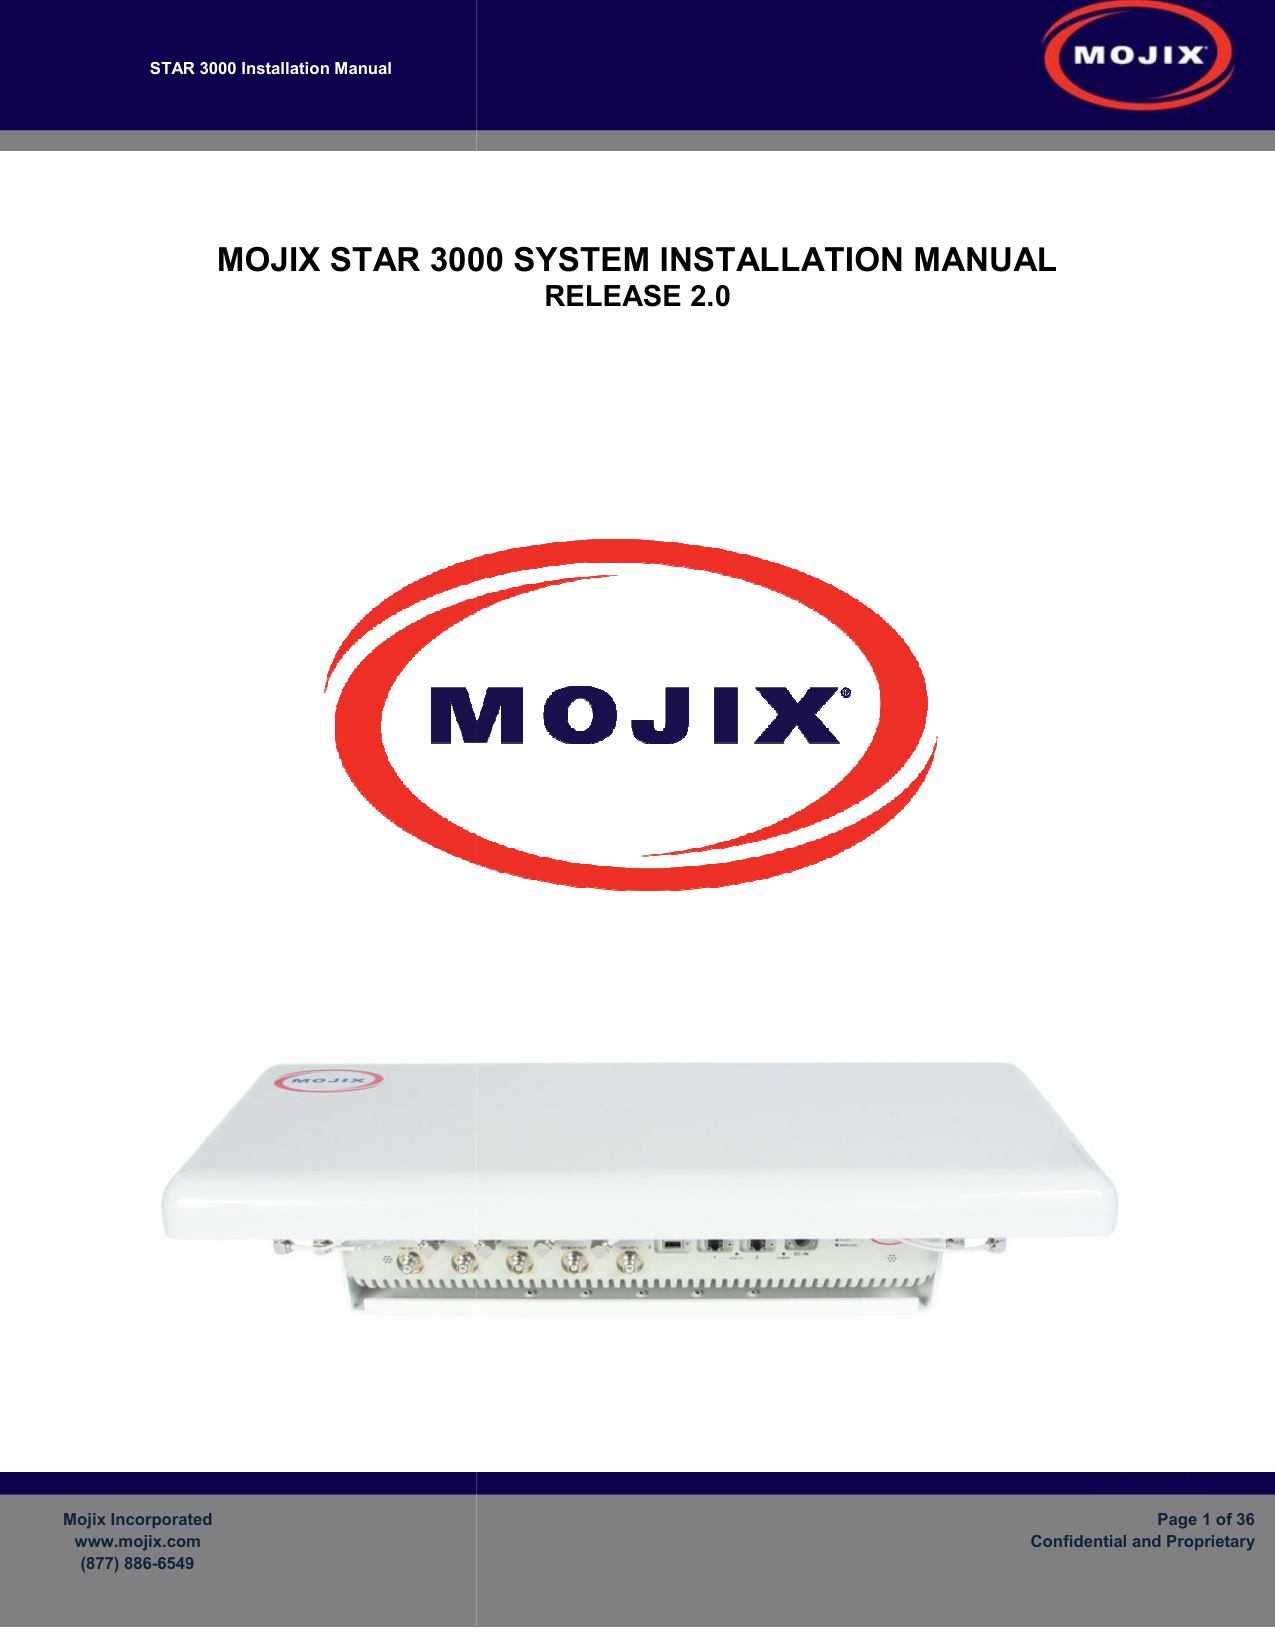 STAR 3000 Installation Manual       Mojix Incorporated www.mojix.com (877) 886-6549  MOJIX STAR 3000 SYSTEM          000 SYSTEM INSTALLATION MANUALRELEASE 2.0    Page 1 of 36 Confidential and Proprietary MANUAL   